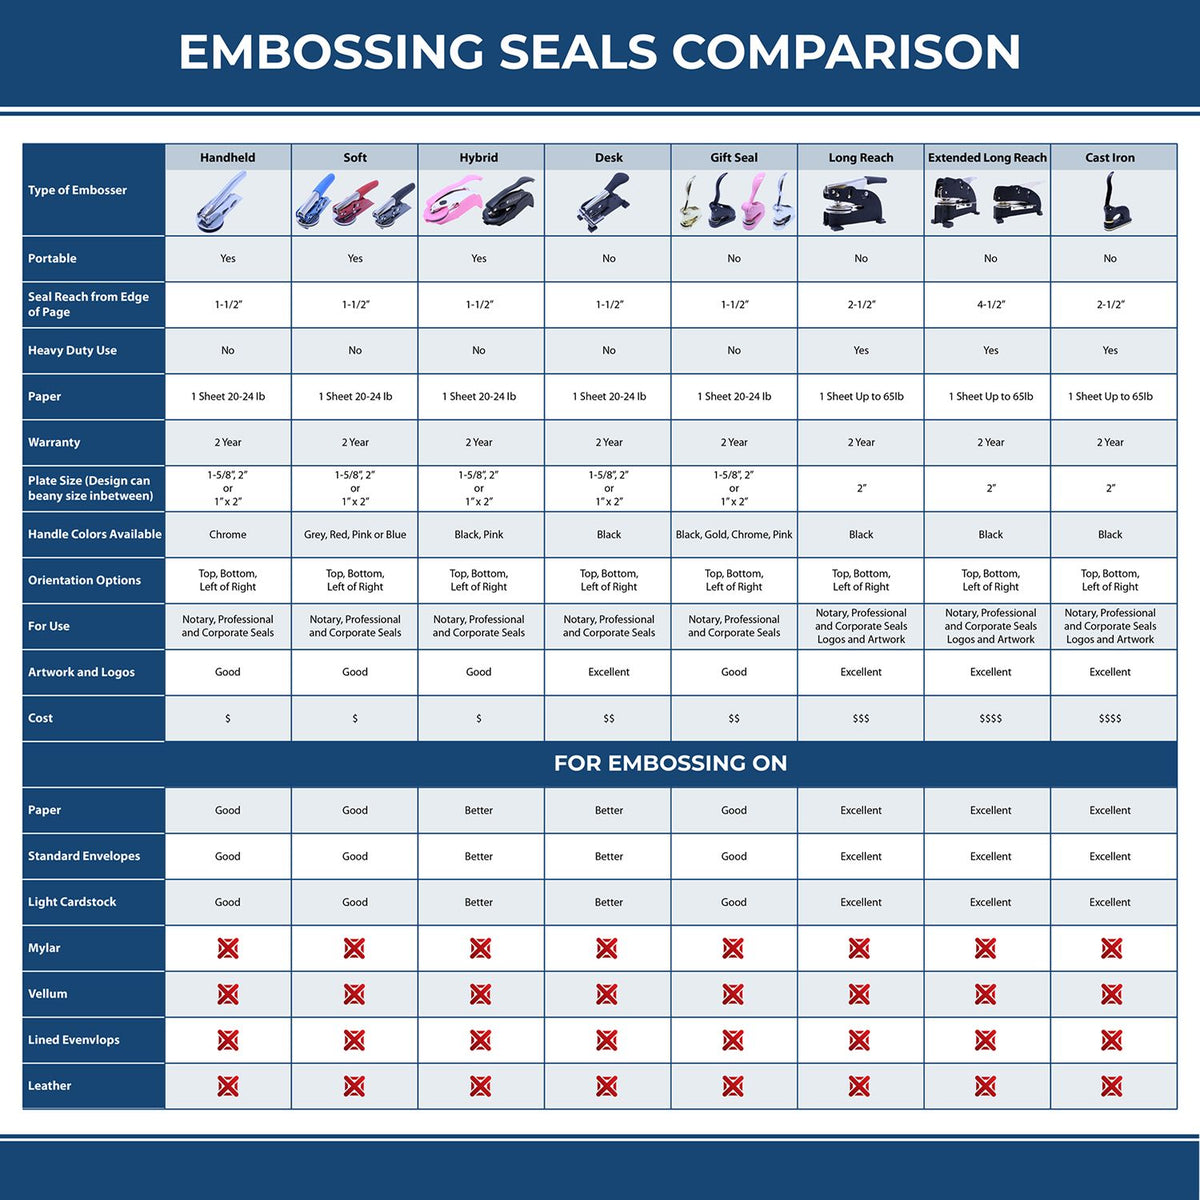 A comparison chart for the different types of mount models available for the State of Wyoming Soft Land Surveyor Embossing Seal.